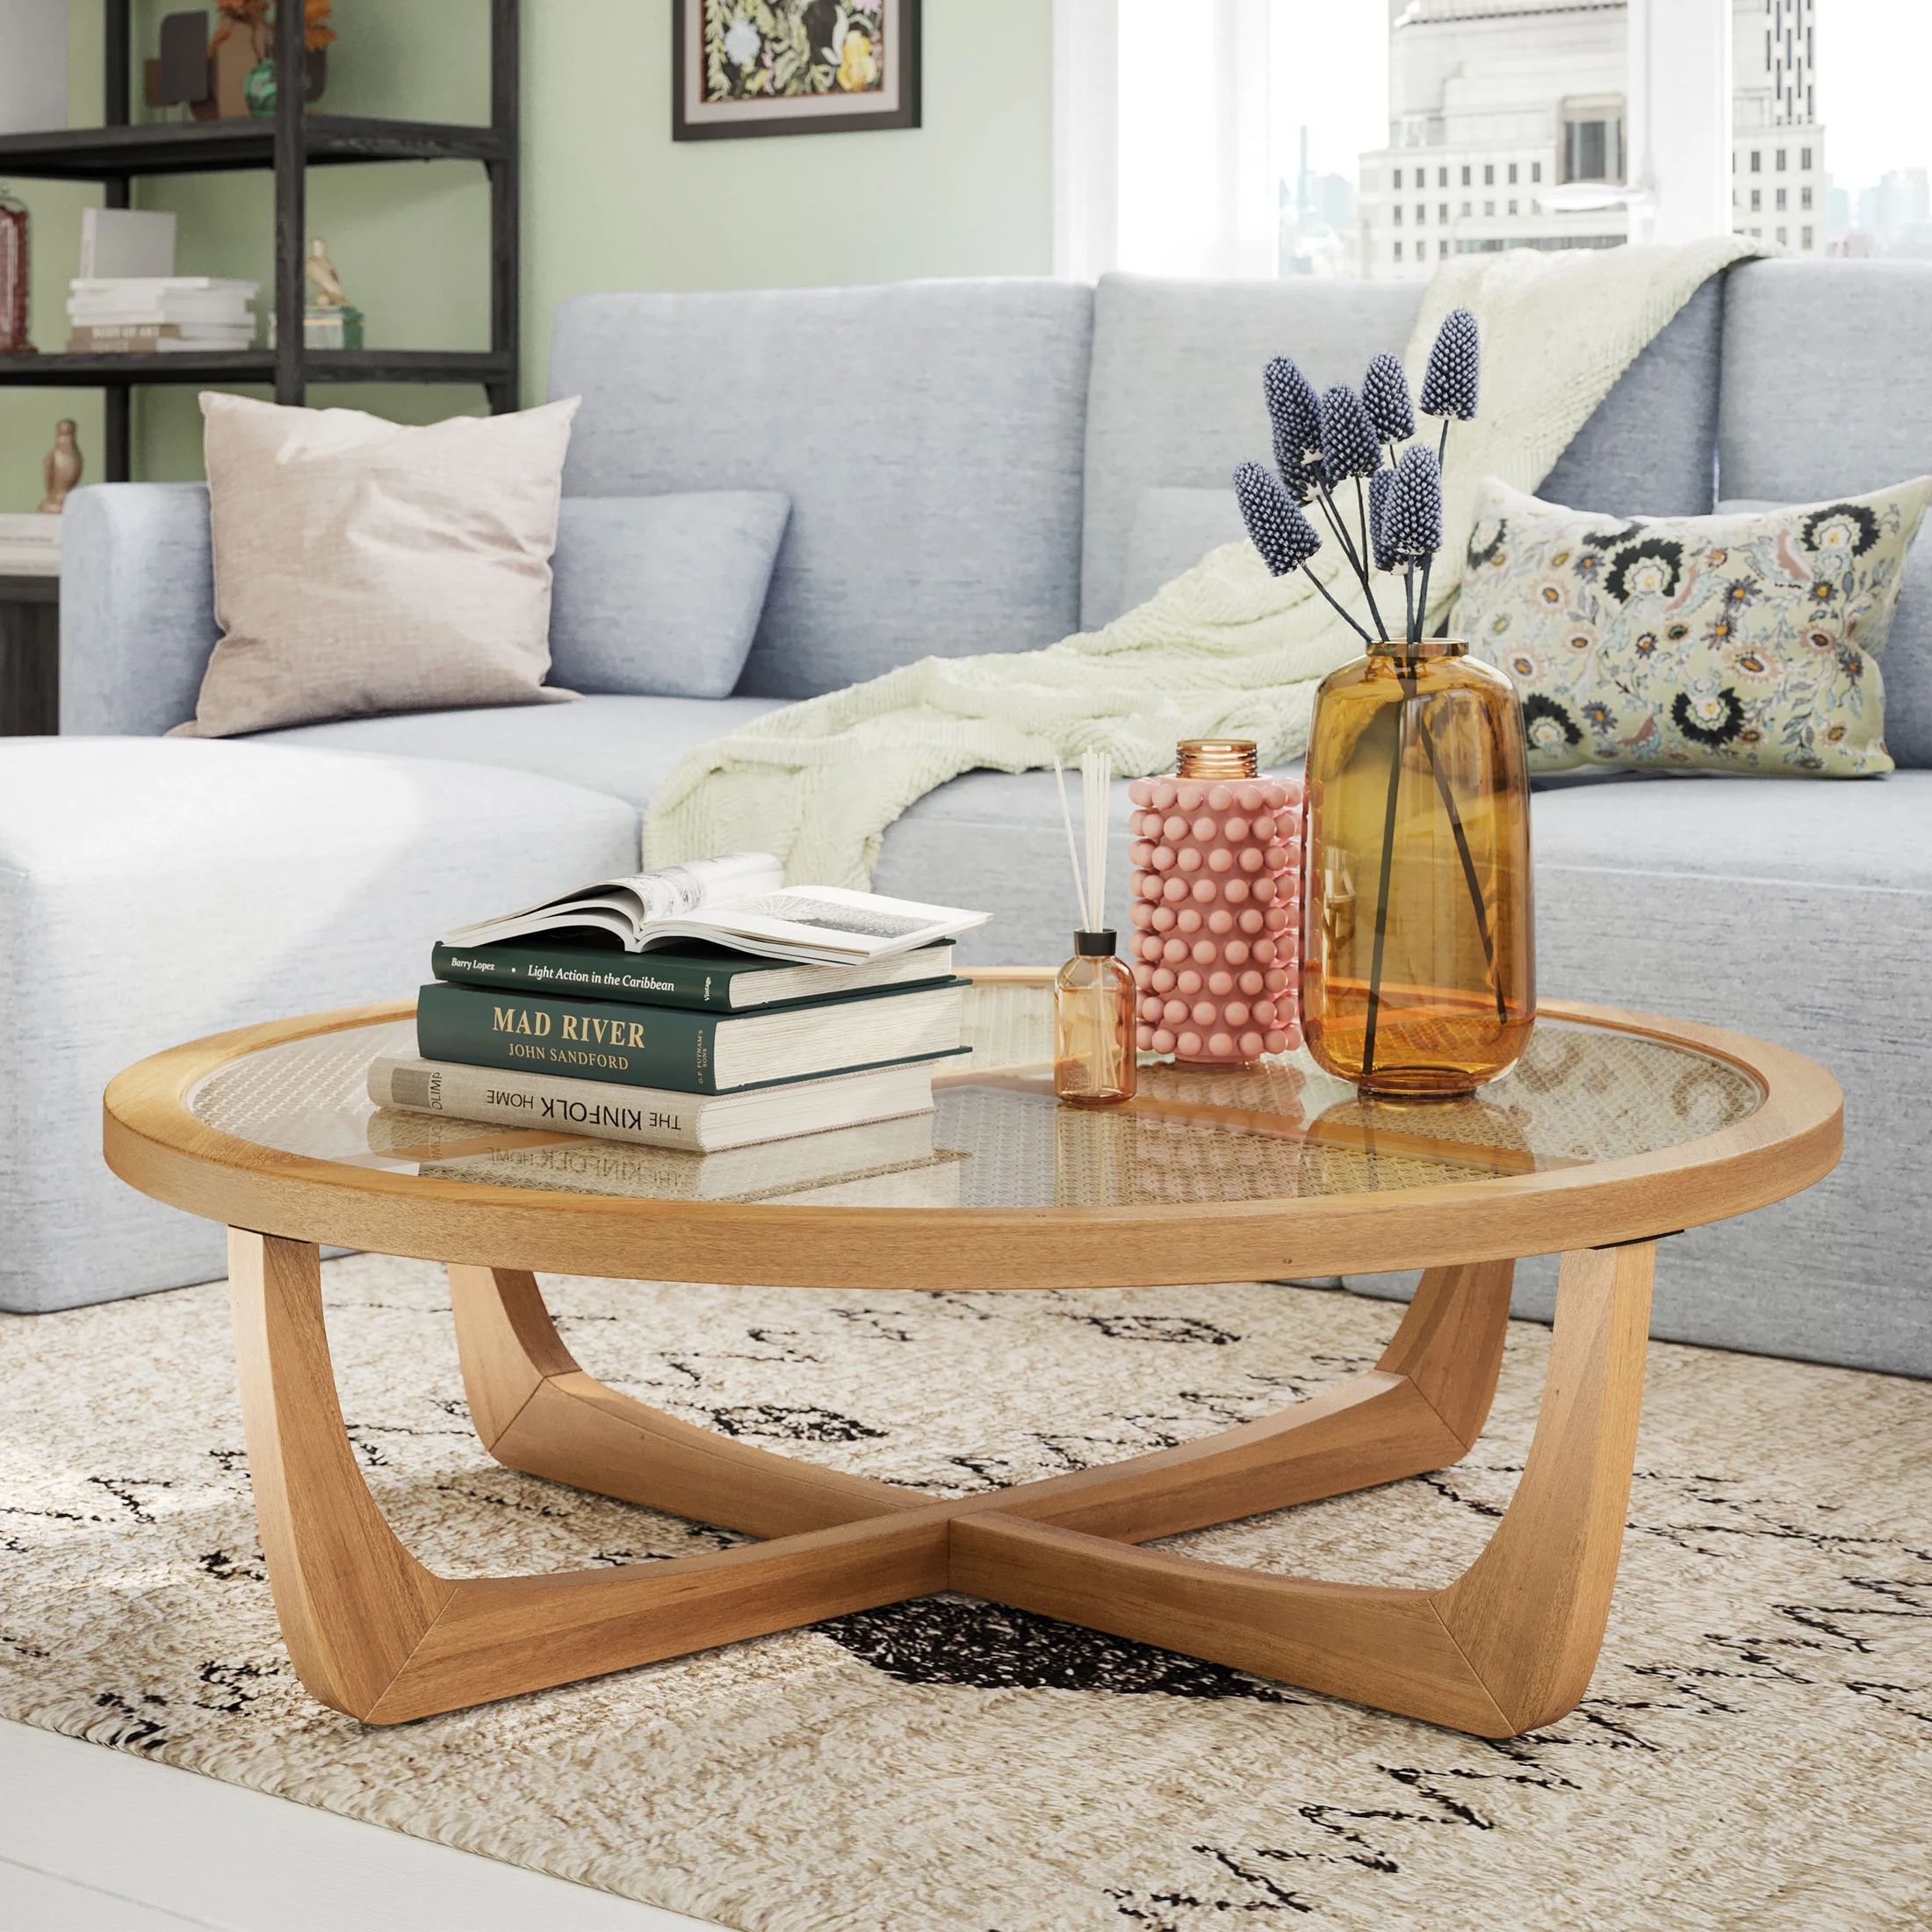 Beautiful Rattan & Glass Coffee Table with Solid Wood Frame by Drew Barrymore, Warm Honey Finish | Walmart (US)